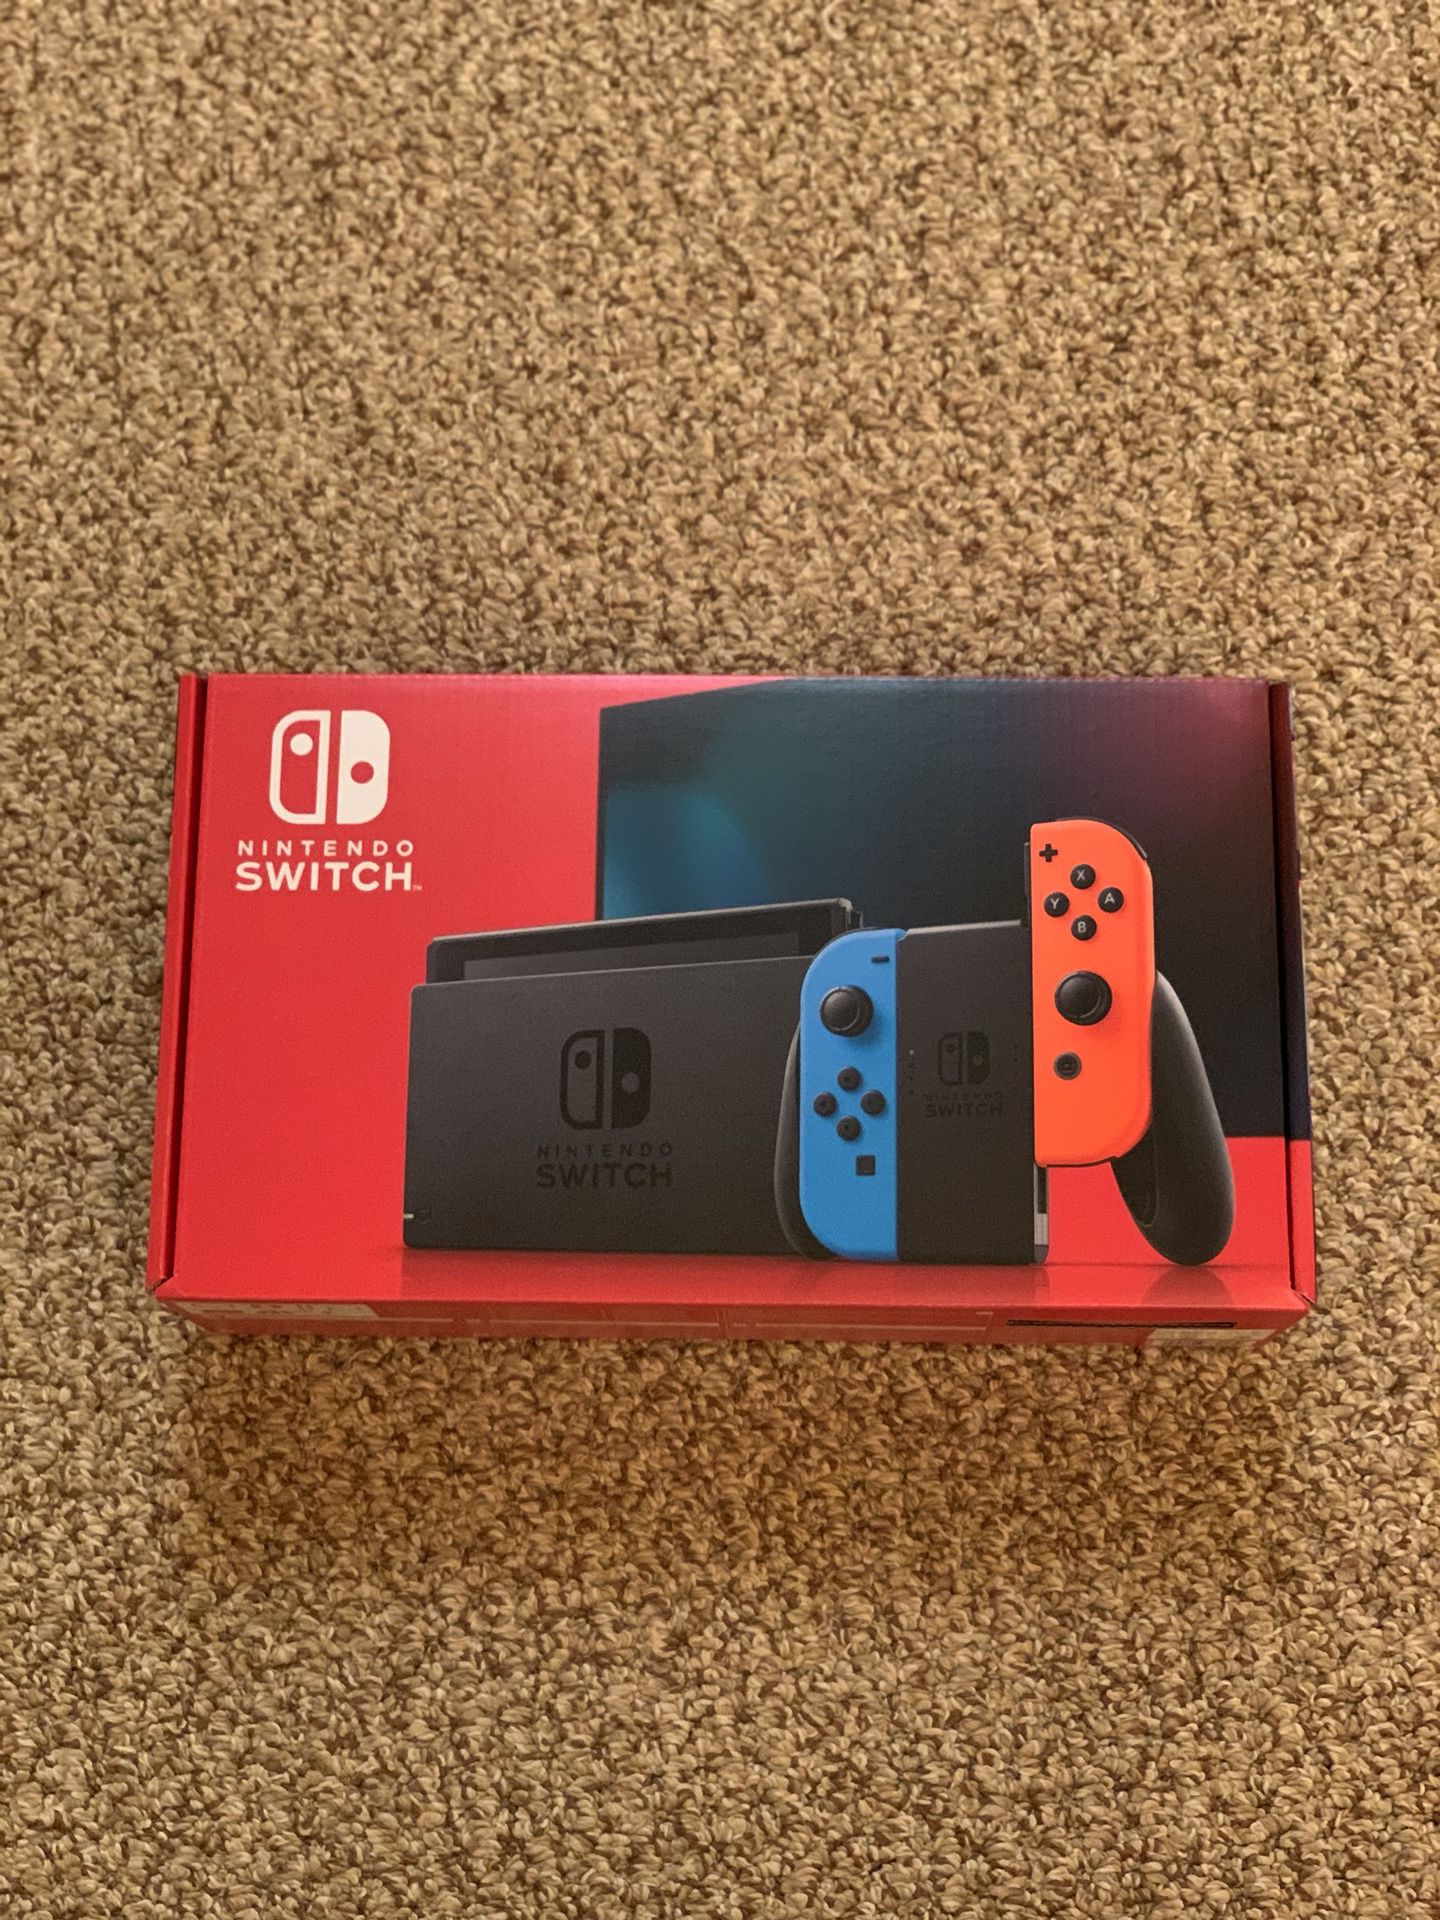 New Nintendo Switch V2 32 GB Neon Blue Red in hand